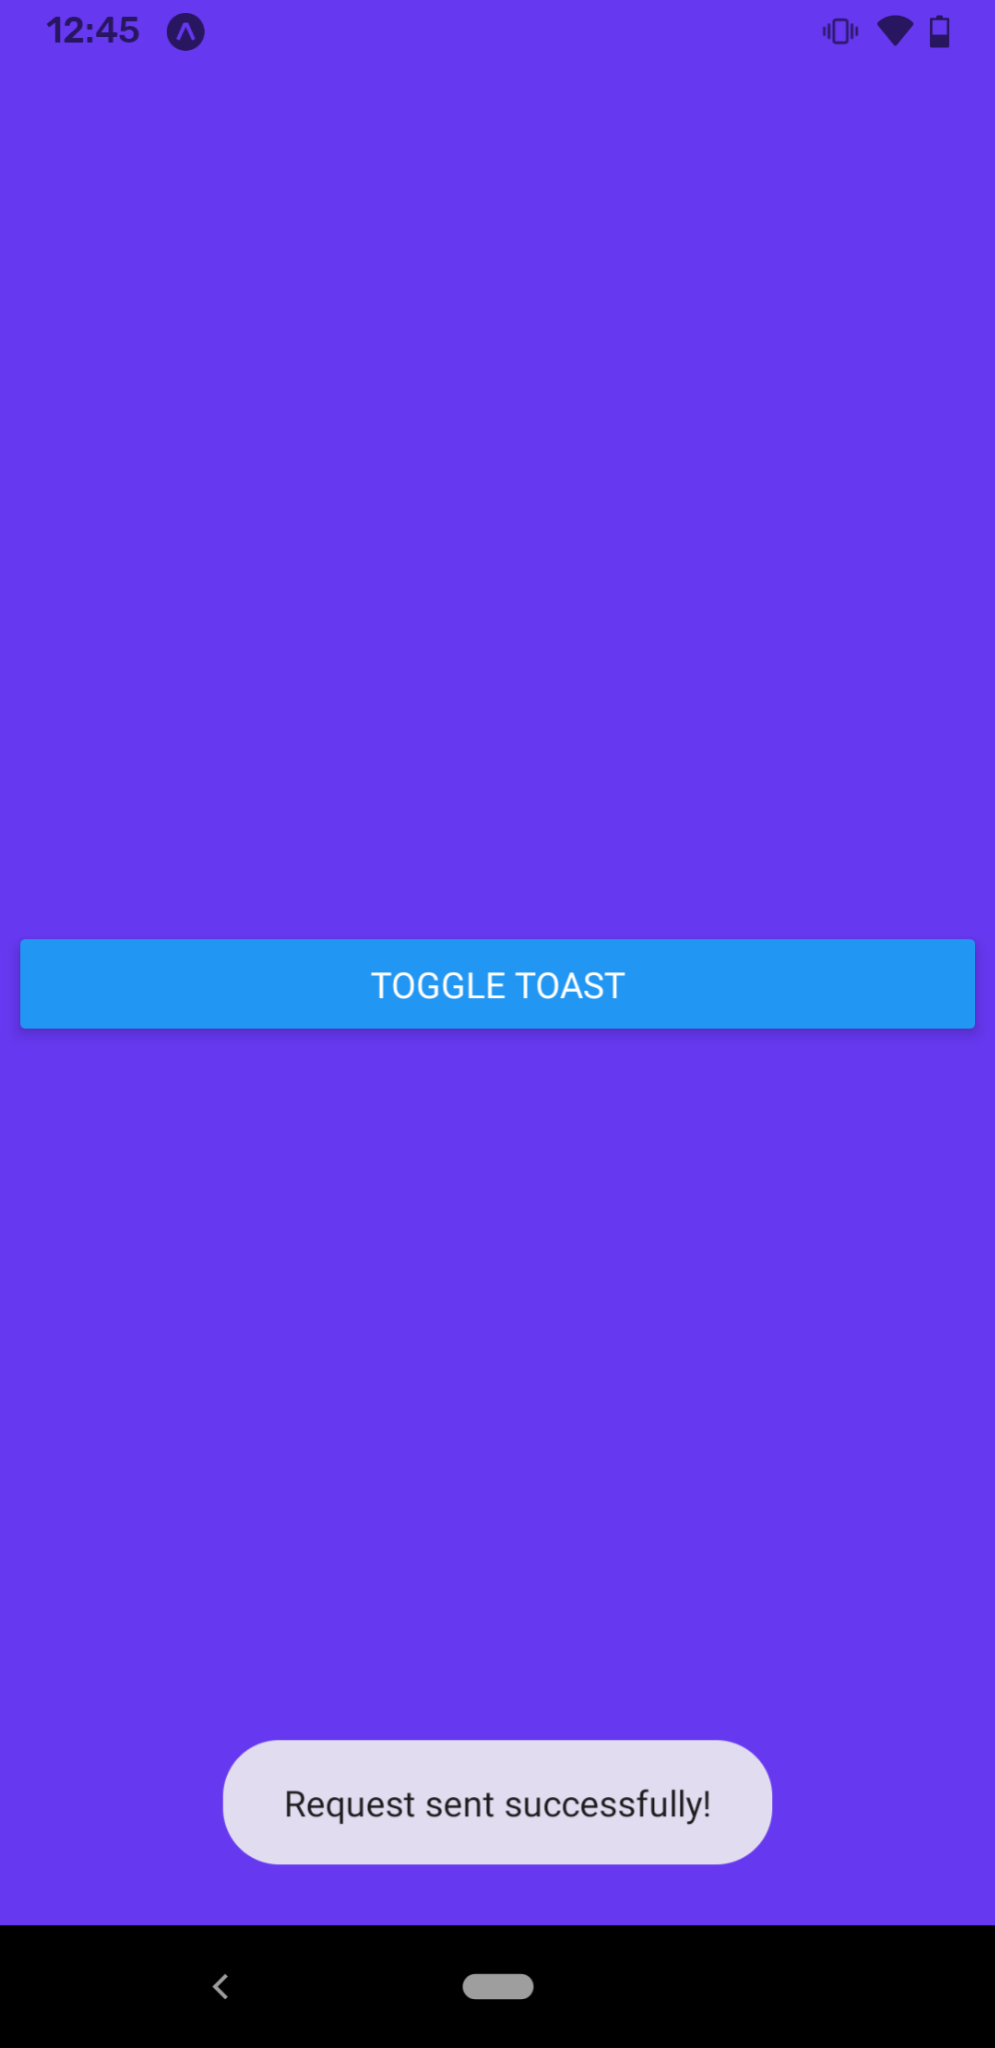 Pixel 3a showing toast message in an Expo app